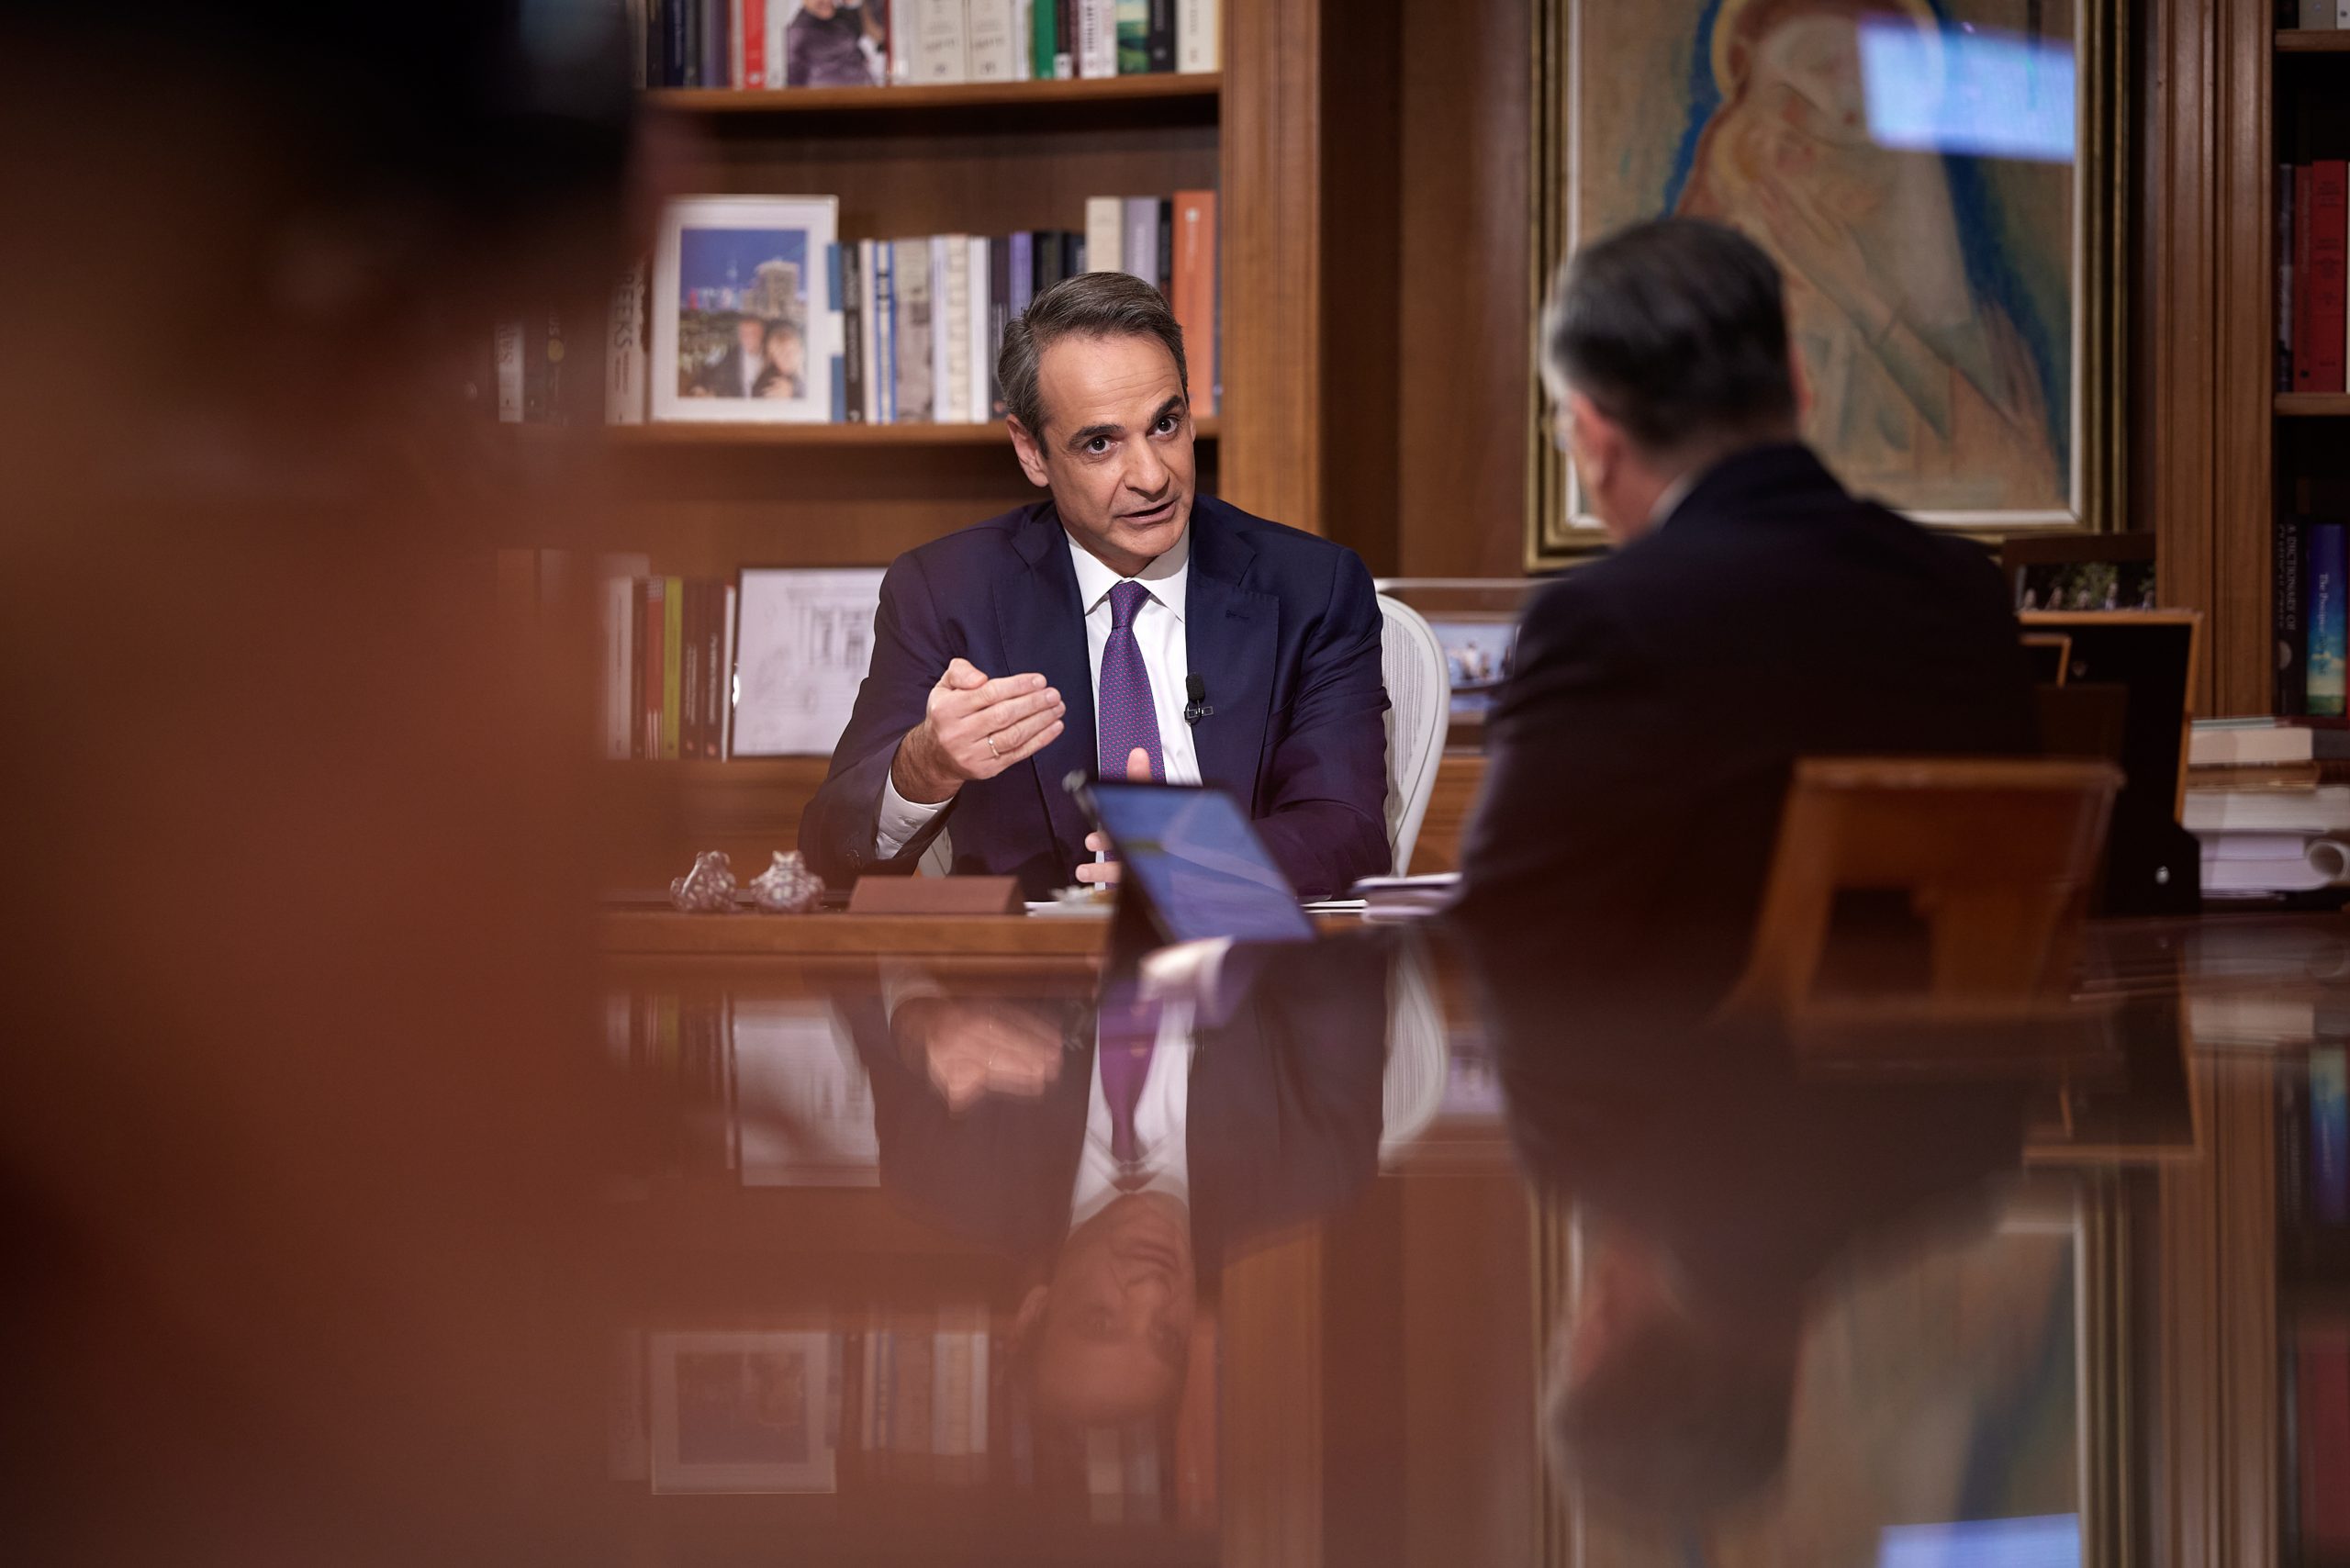 Greek PM Mitsotakis: We Intend to Table Draft Law to ‘Legislate Equality in Marriage’